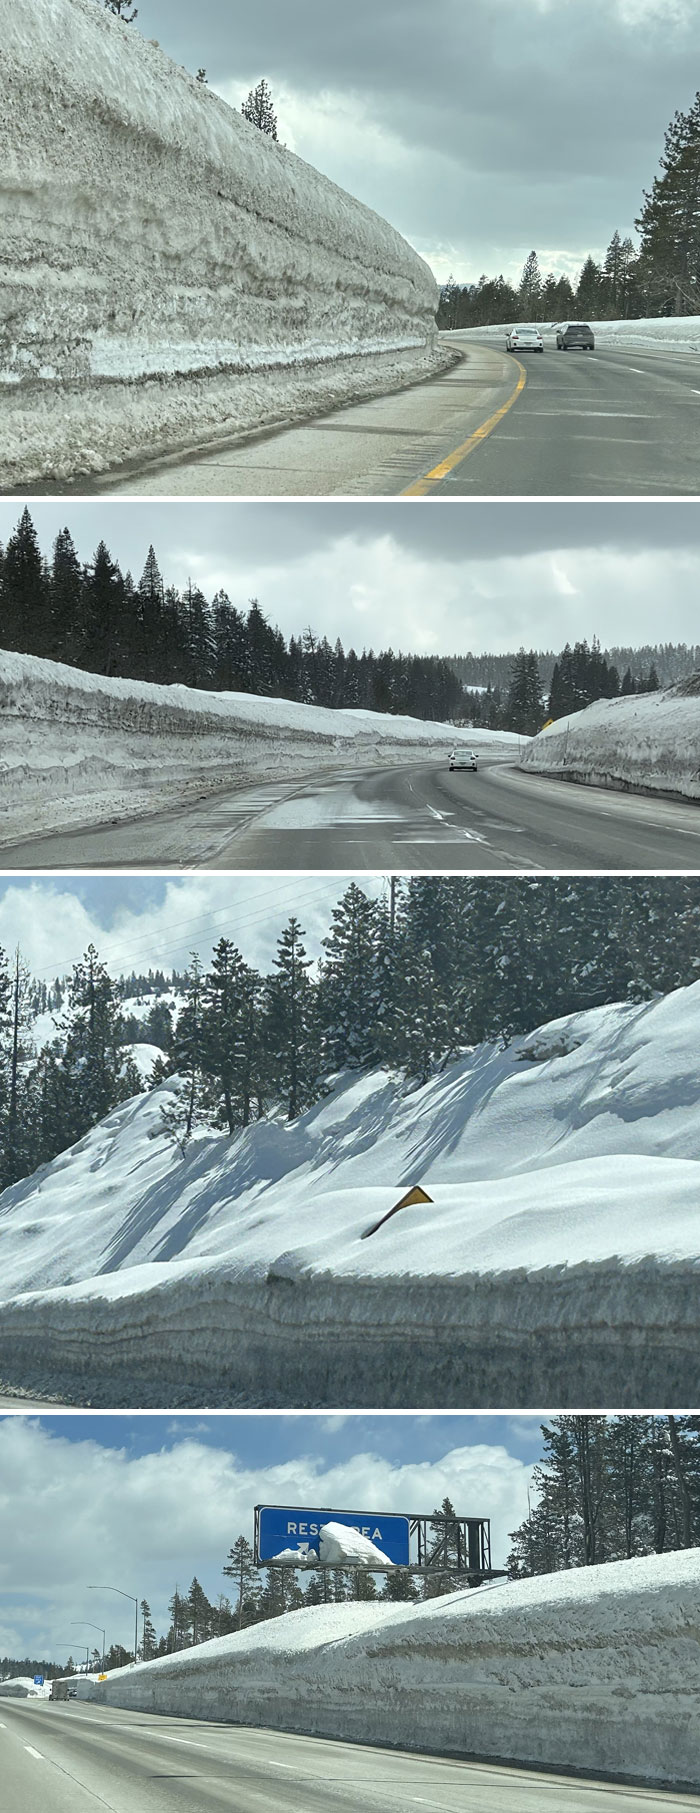 Look At All That Snow Near Donner Summit On I-80. Winter Storm Warning Tonight For 2-3 More Feet. Amazing Season In Sierra